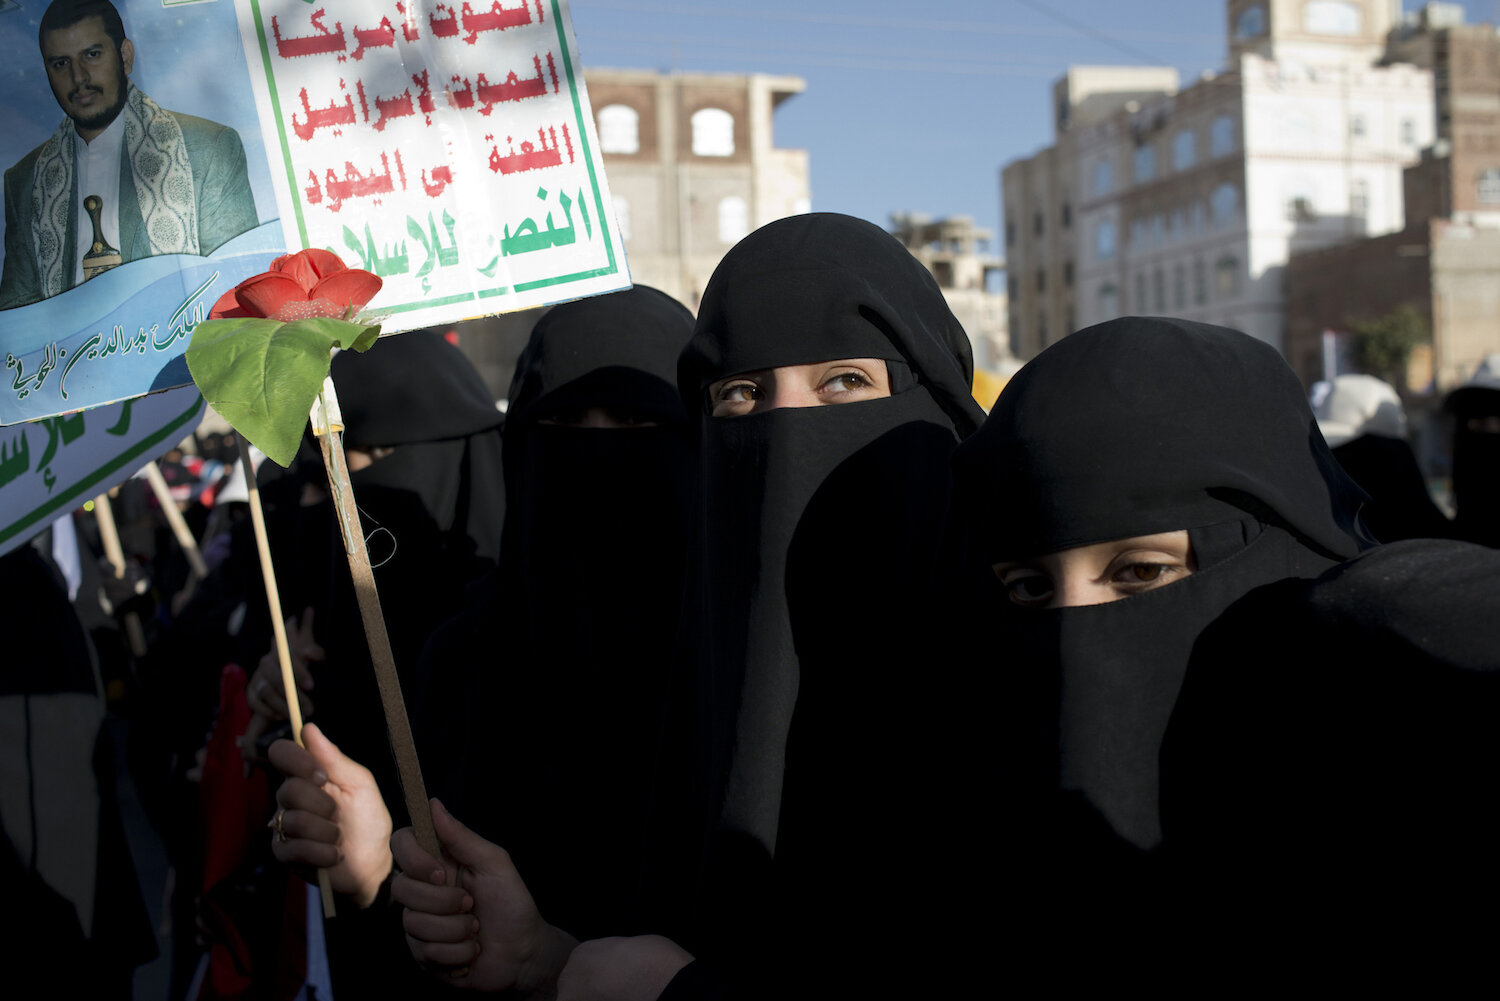  Yemeni women march in support of the Houthis holding up their slogan and an image of the leader, Abdul Malik al Houthi. 